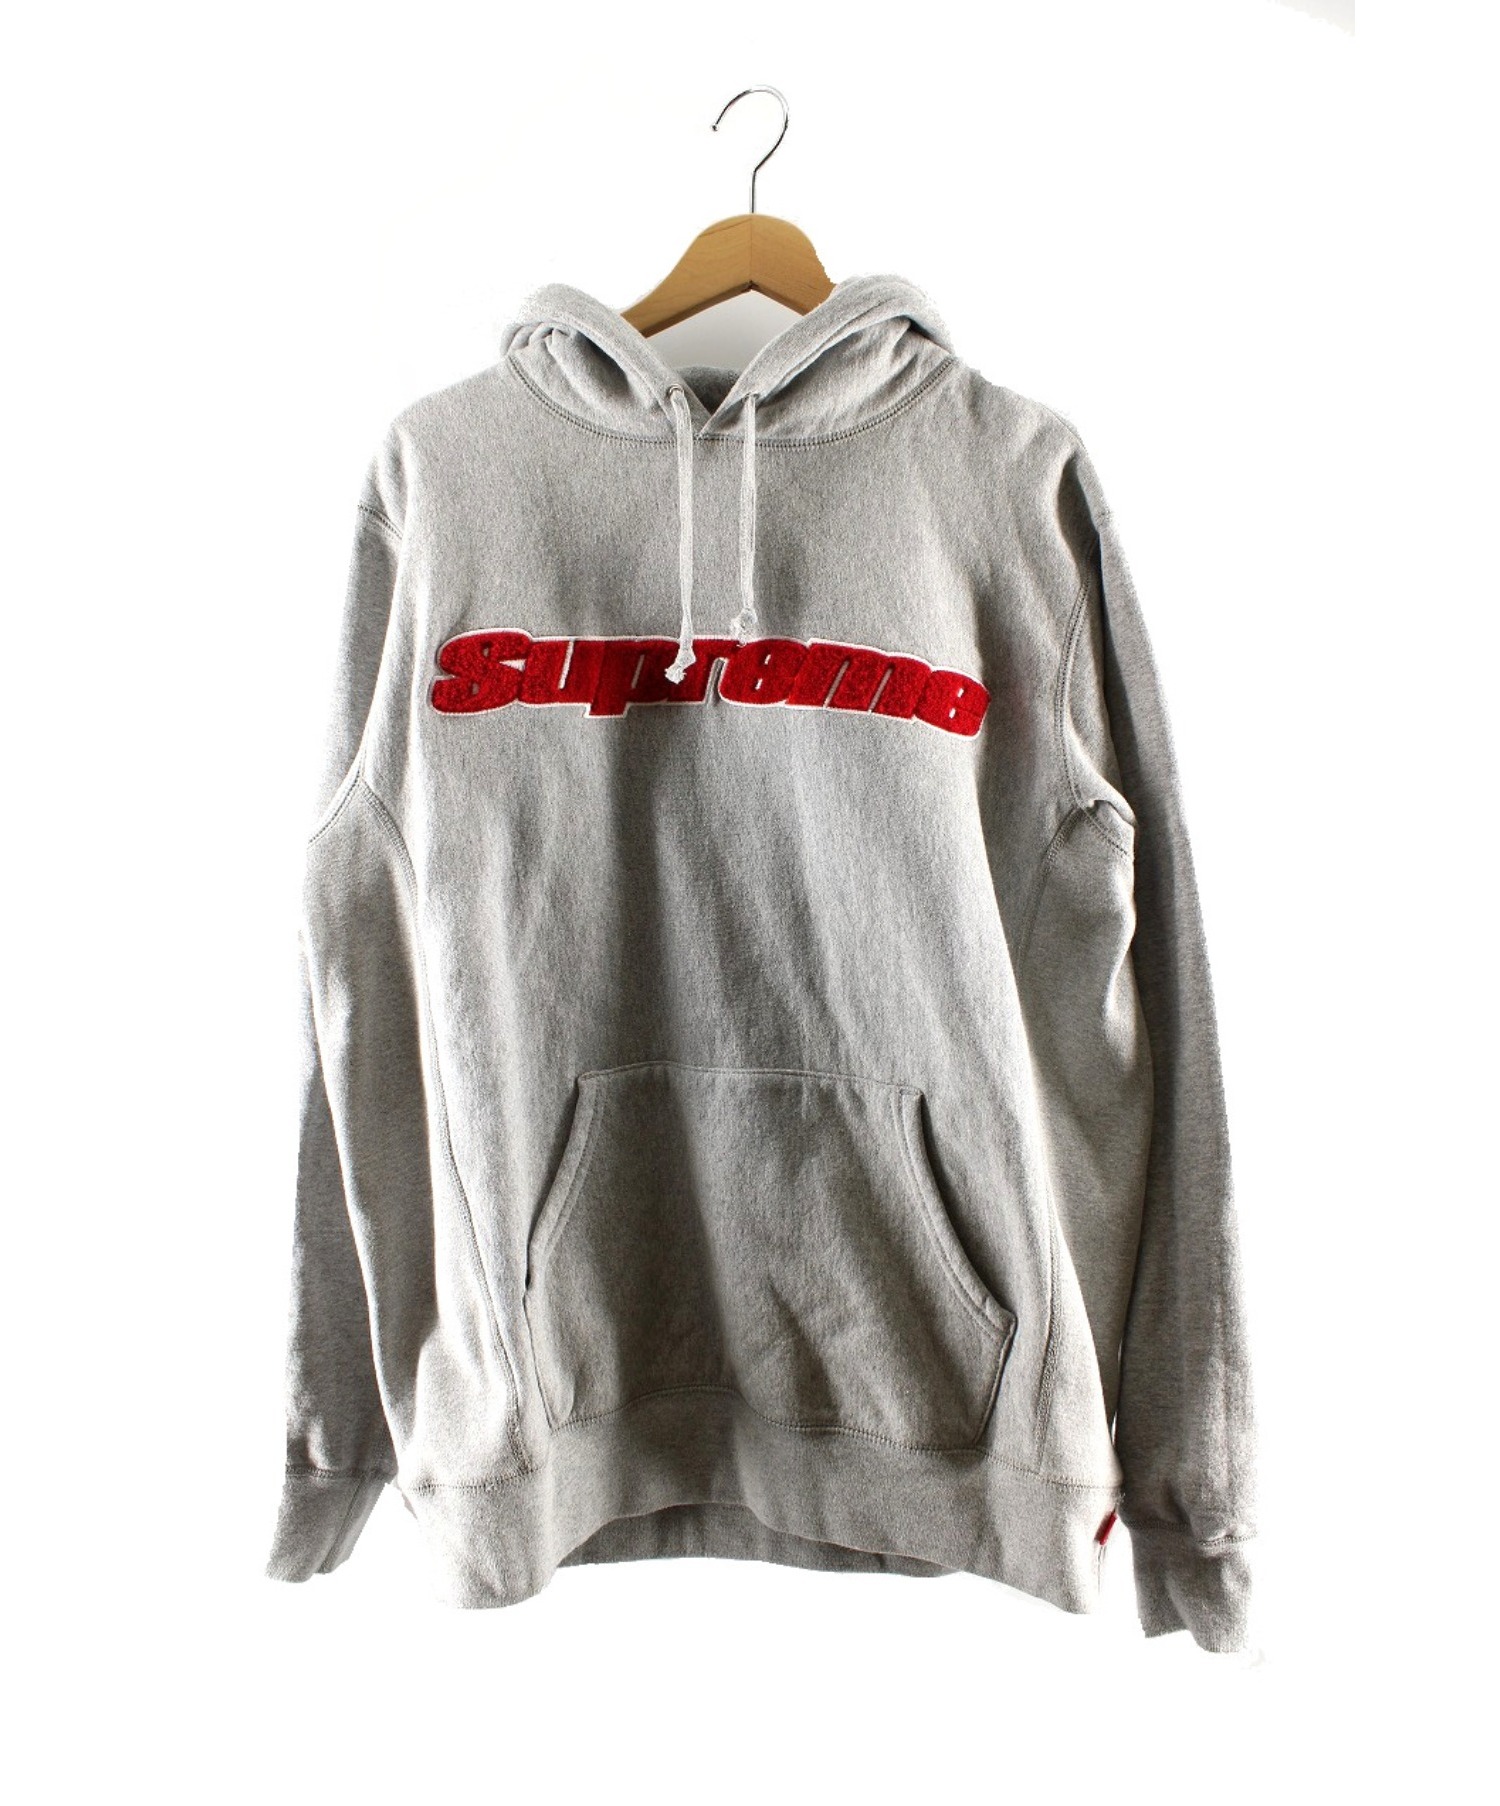 Supreme Chenille Hooded Sweatshirt Online Store, UP TO 68% OFF 